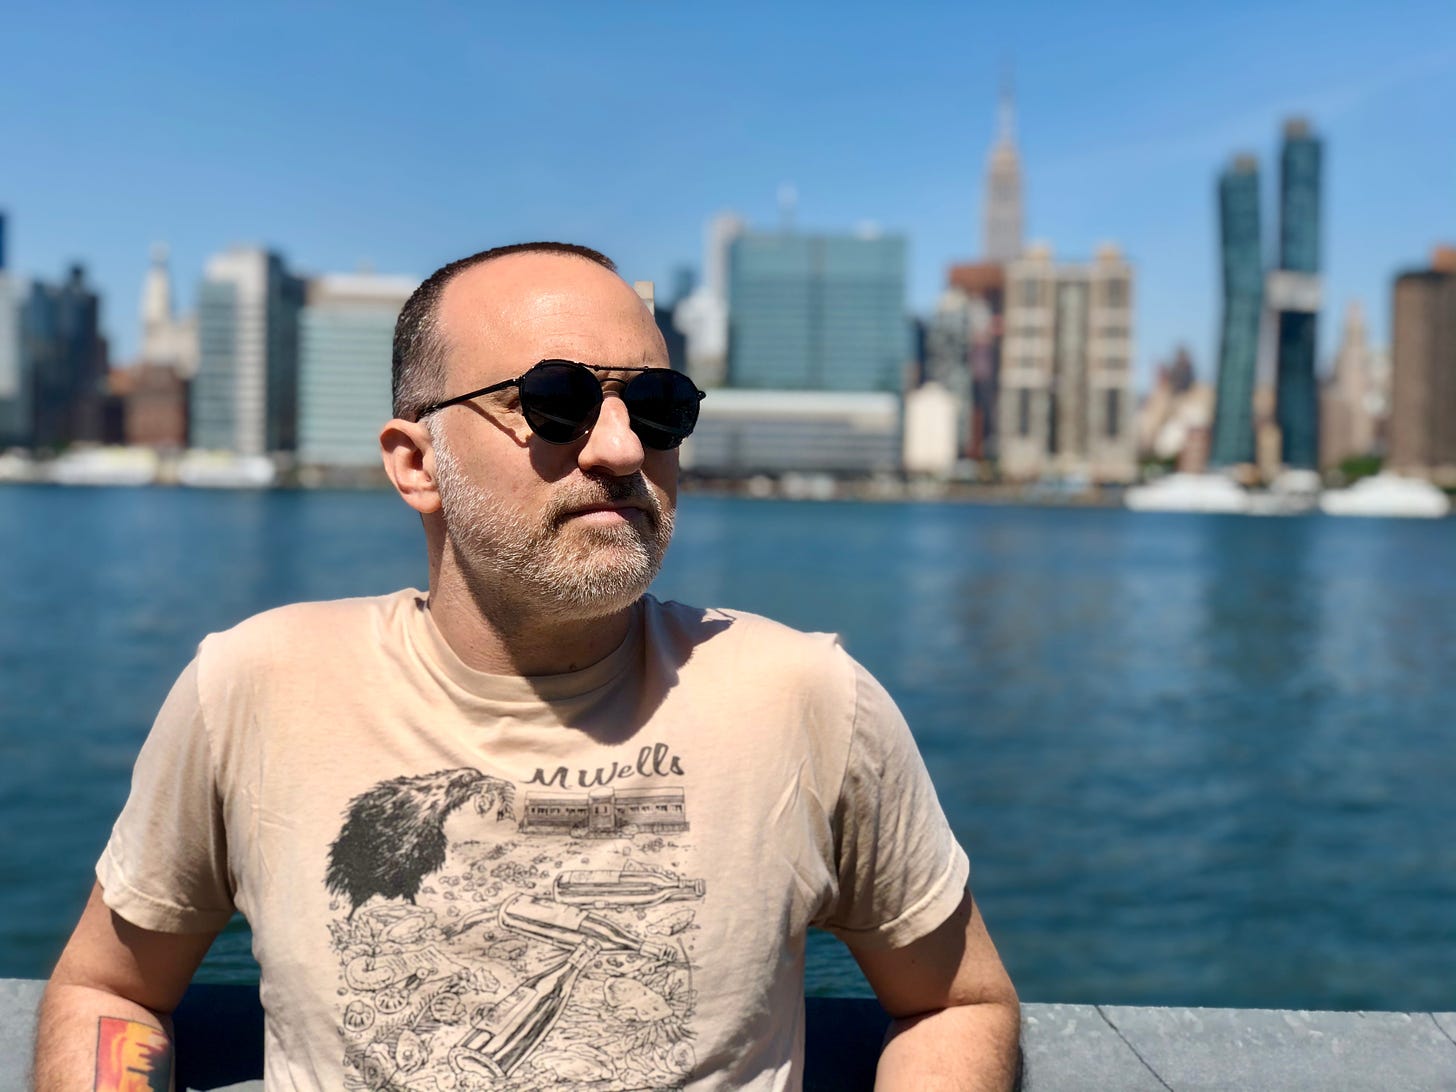 Dan Saltzstein is a middle-aged man with short gray hair and beard. He stares off into the distance behind a pair of sunglasses with the New York City skyline blurred behind him. 